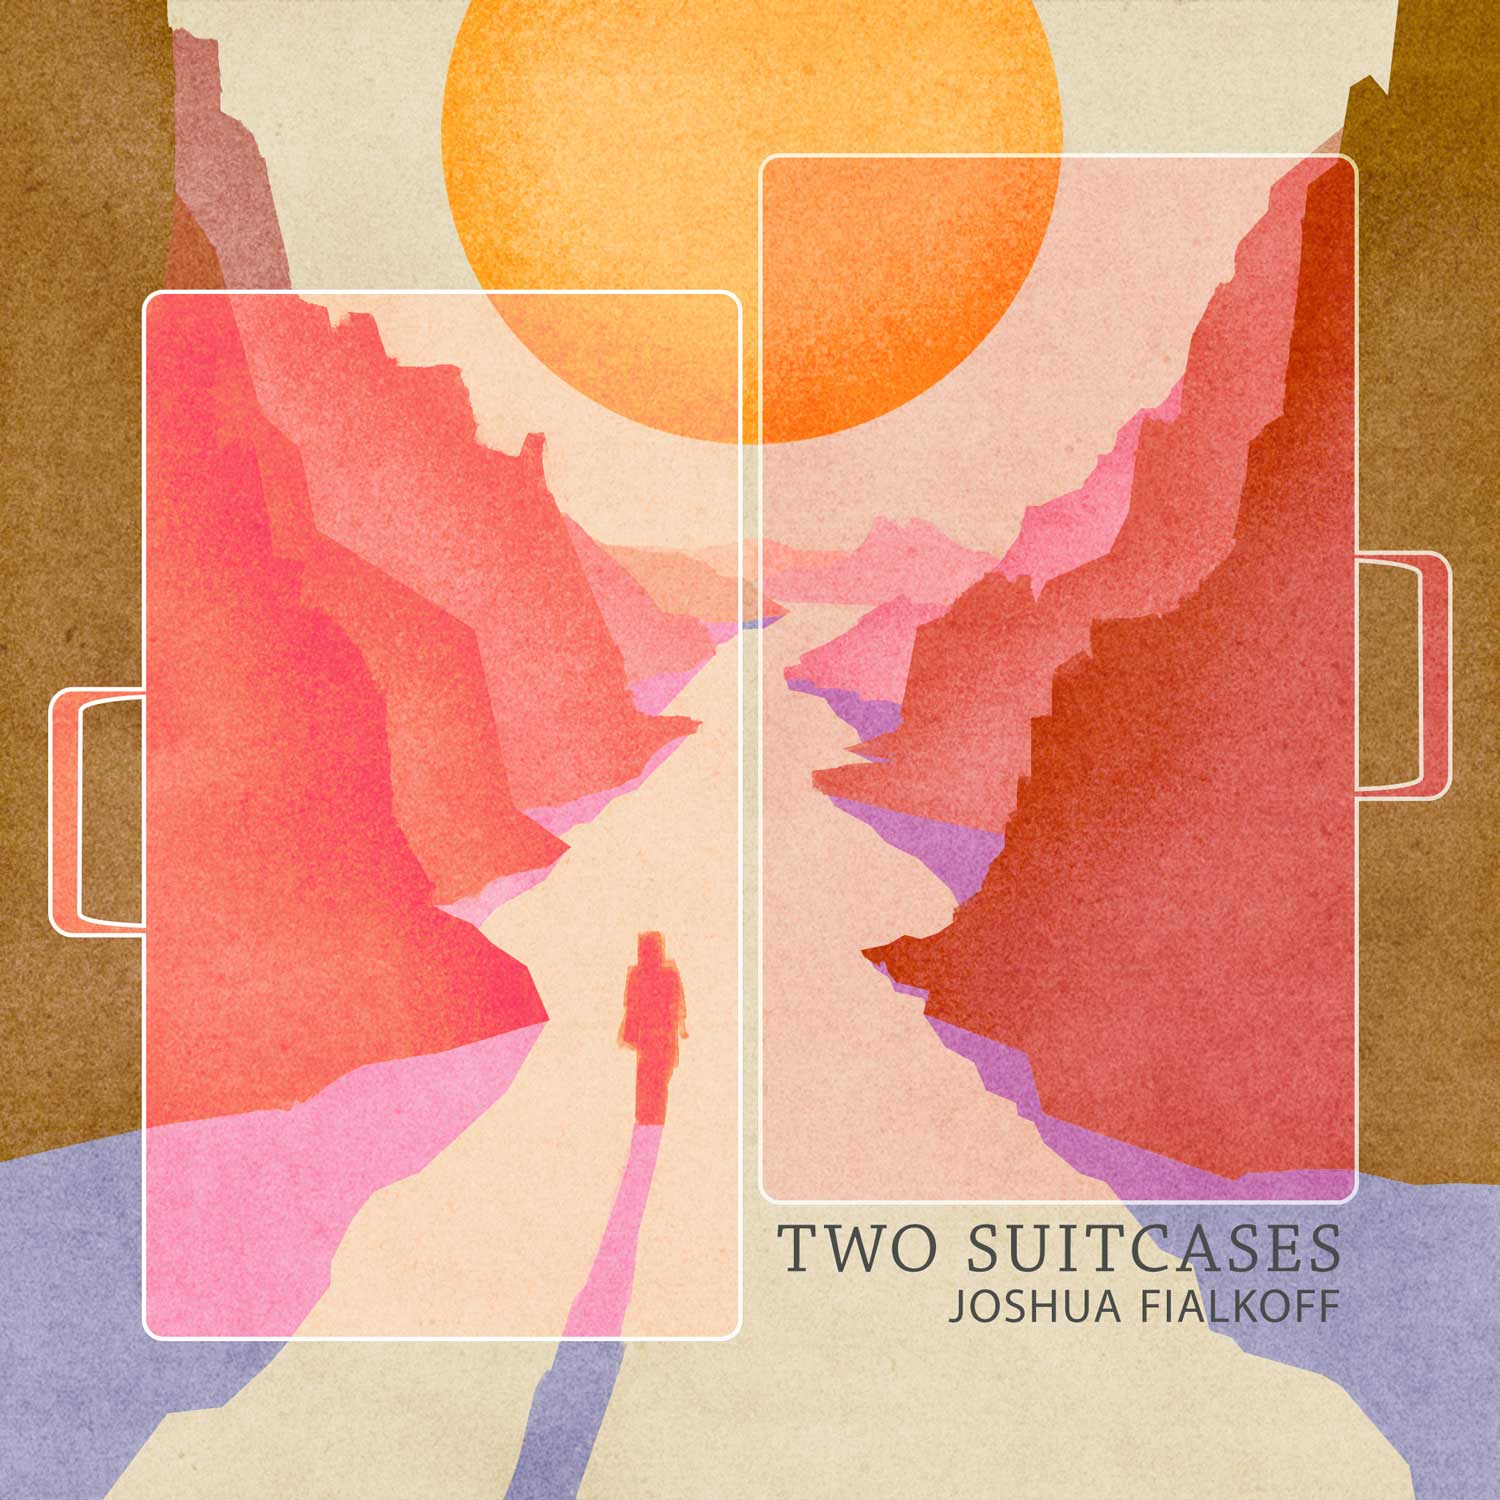 Final Album design for two suitcases album by josh fialkoff